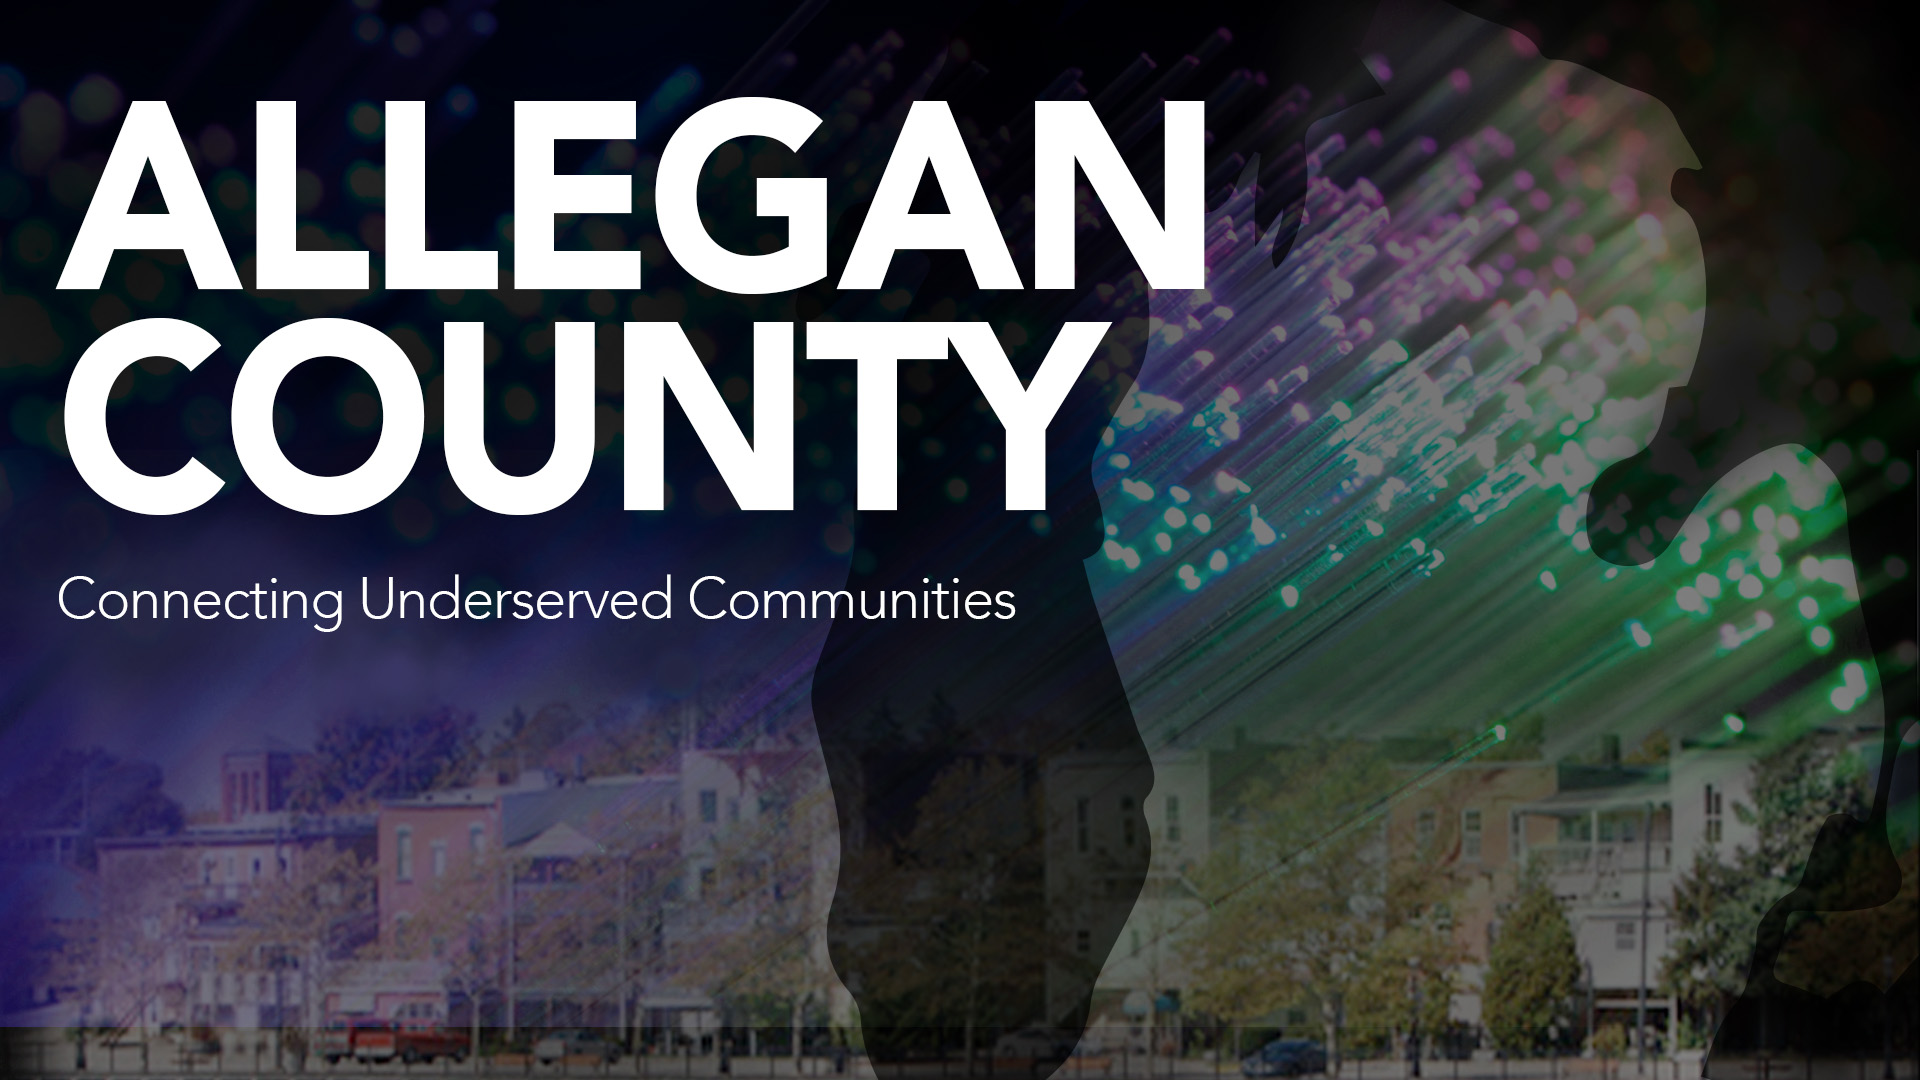 123NET wins $65 Million Project with Allegan County for County-wide Broadband Internet